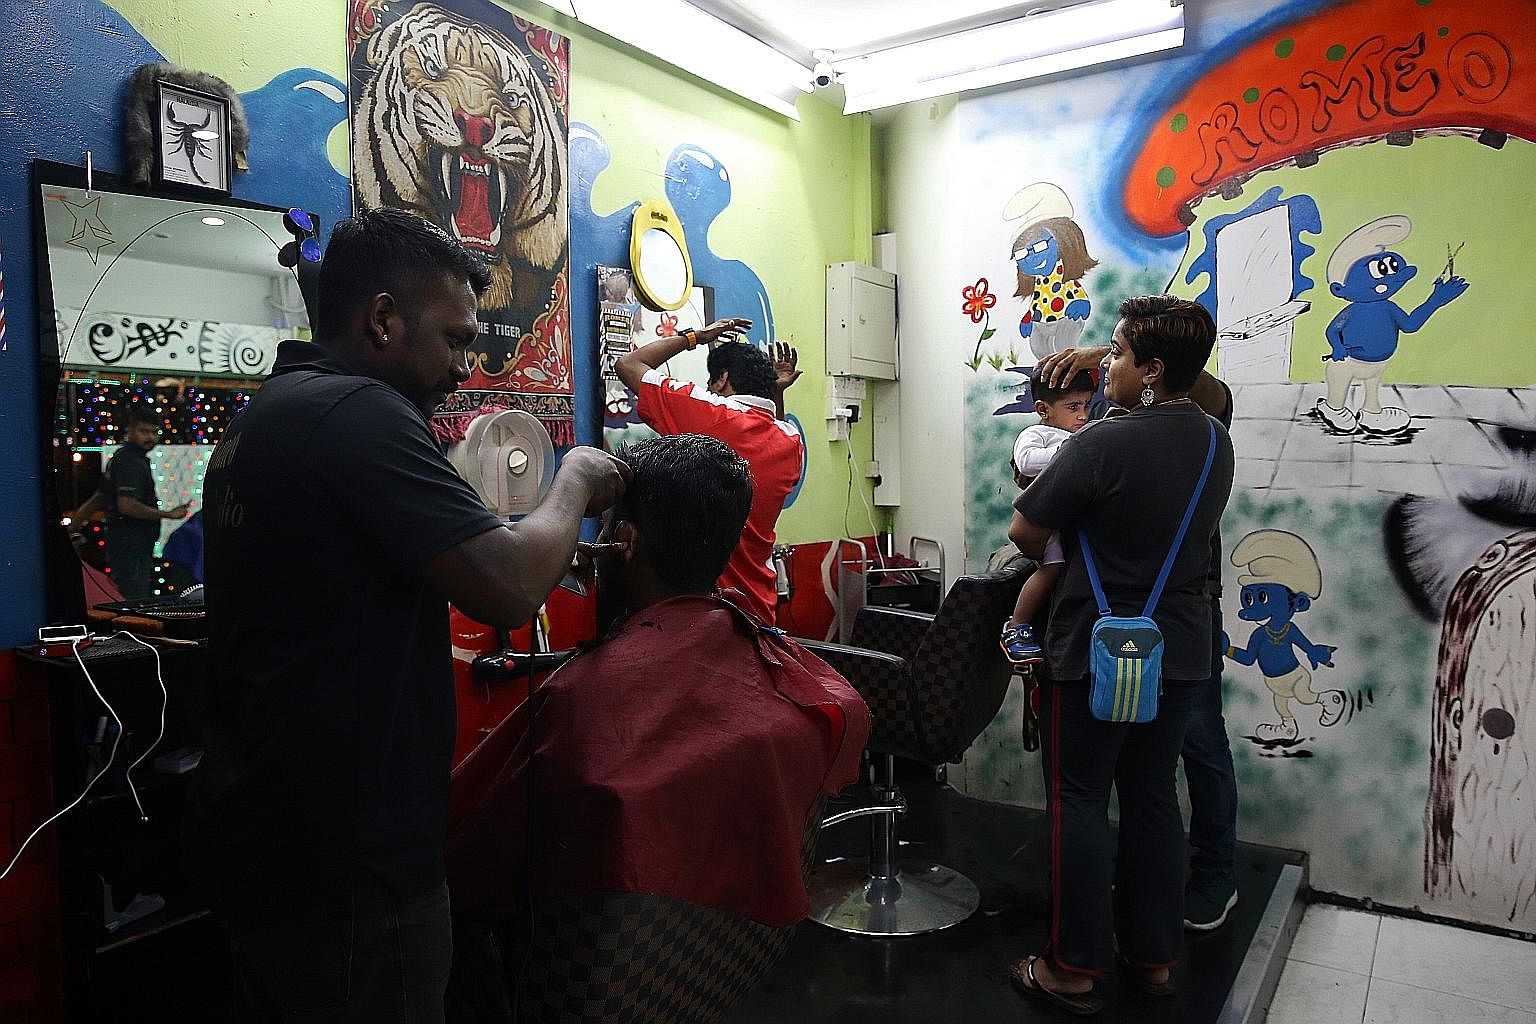 Business is slow during the day at Romeo Hair Studio at Block 1A, with most Malaysians heading straight back to Johor after work, and residents in this and neighbouring blocks having moved out under Sers. But things brighten up somewhat in the evenin